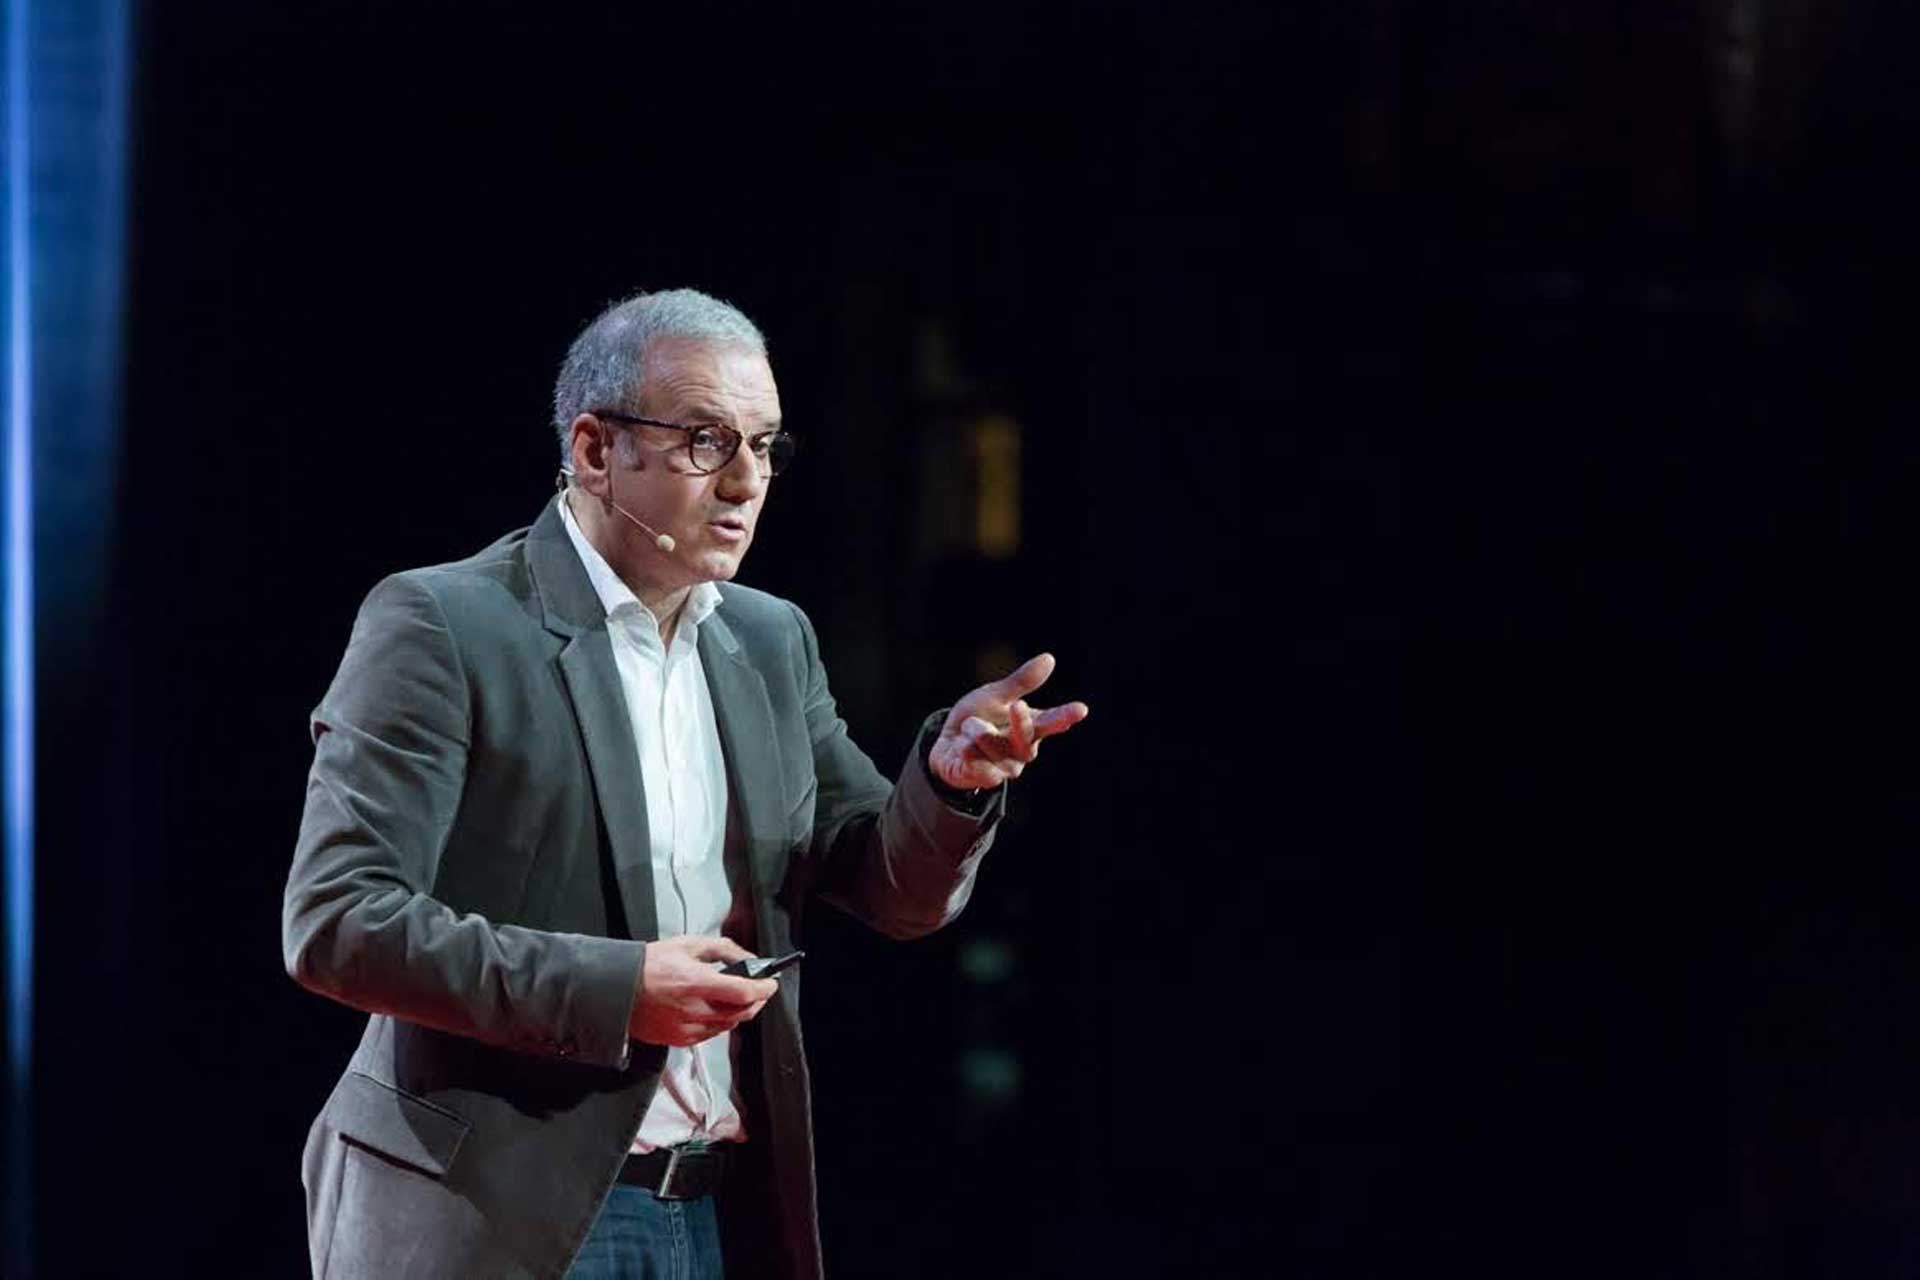 conference-TEDxParis-2015-13.jpg